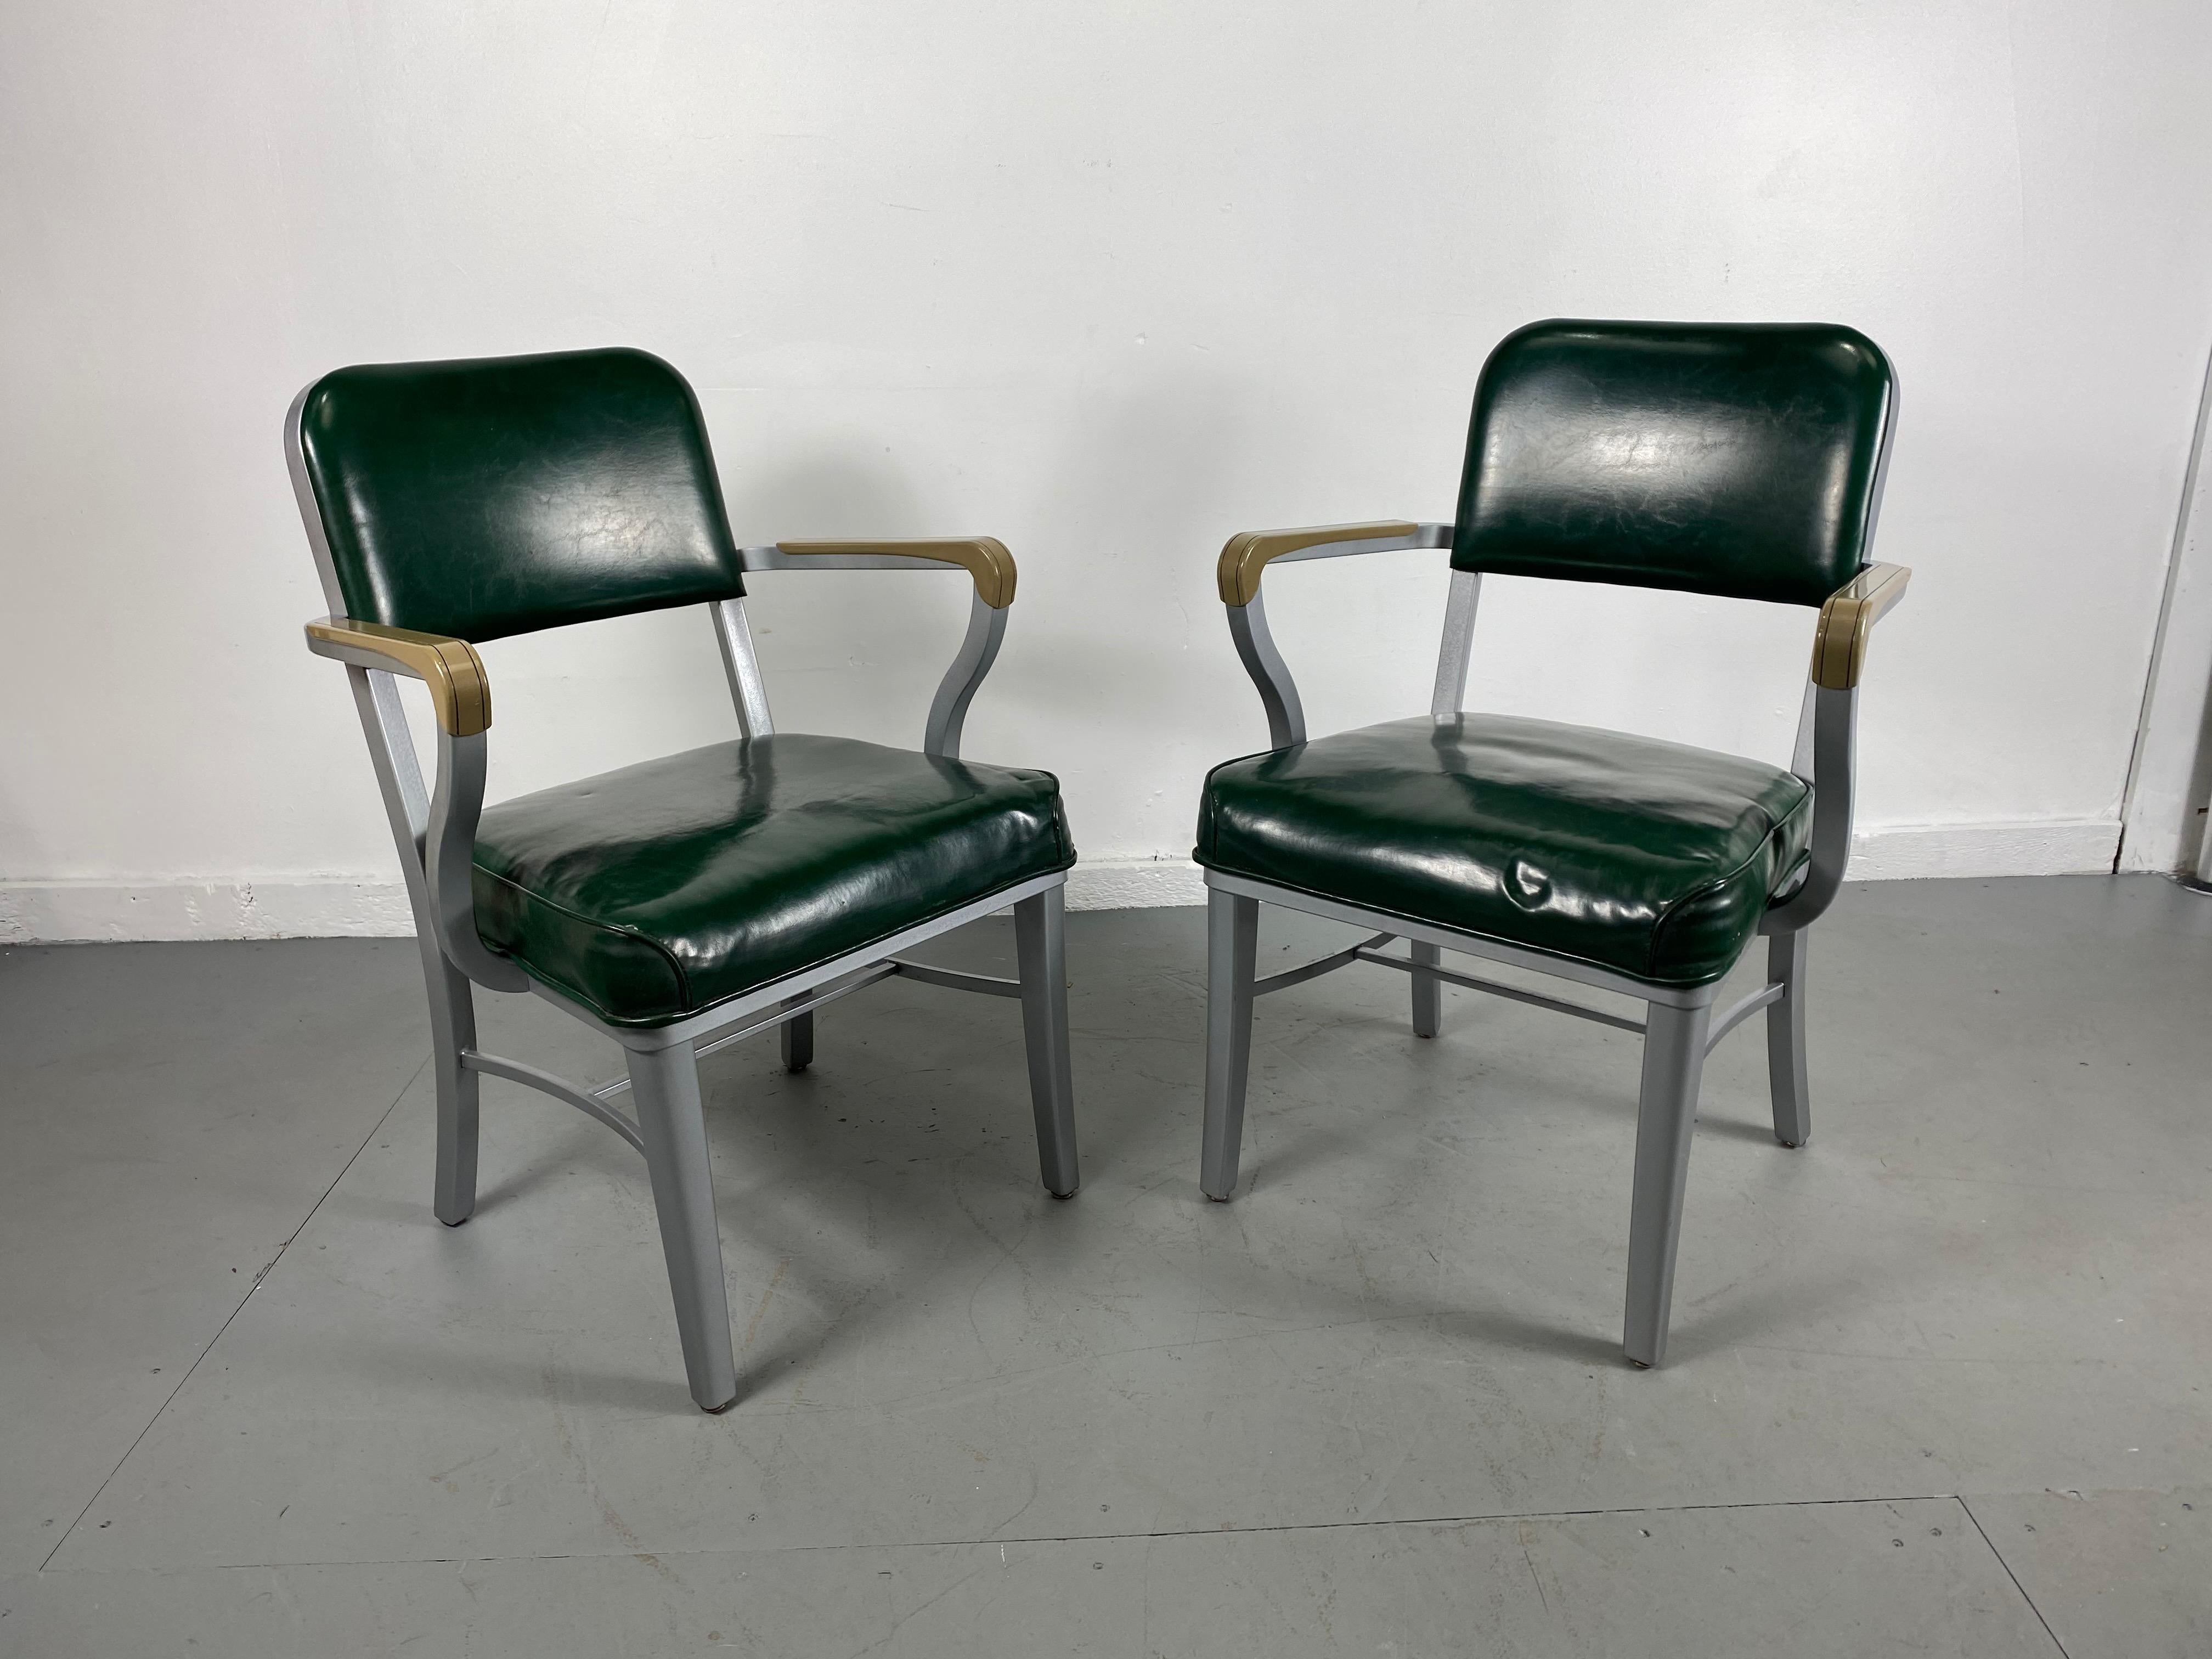 American Classic Pair Grey Industrial Office Steel Tanker Arm Chairs by Steelcase